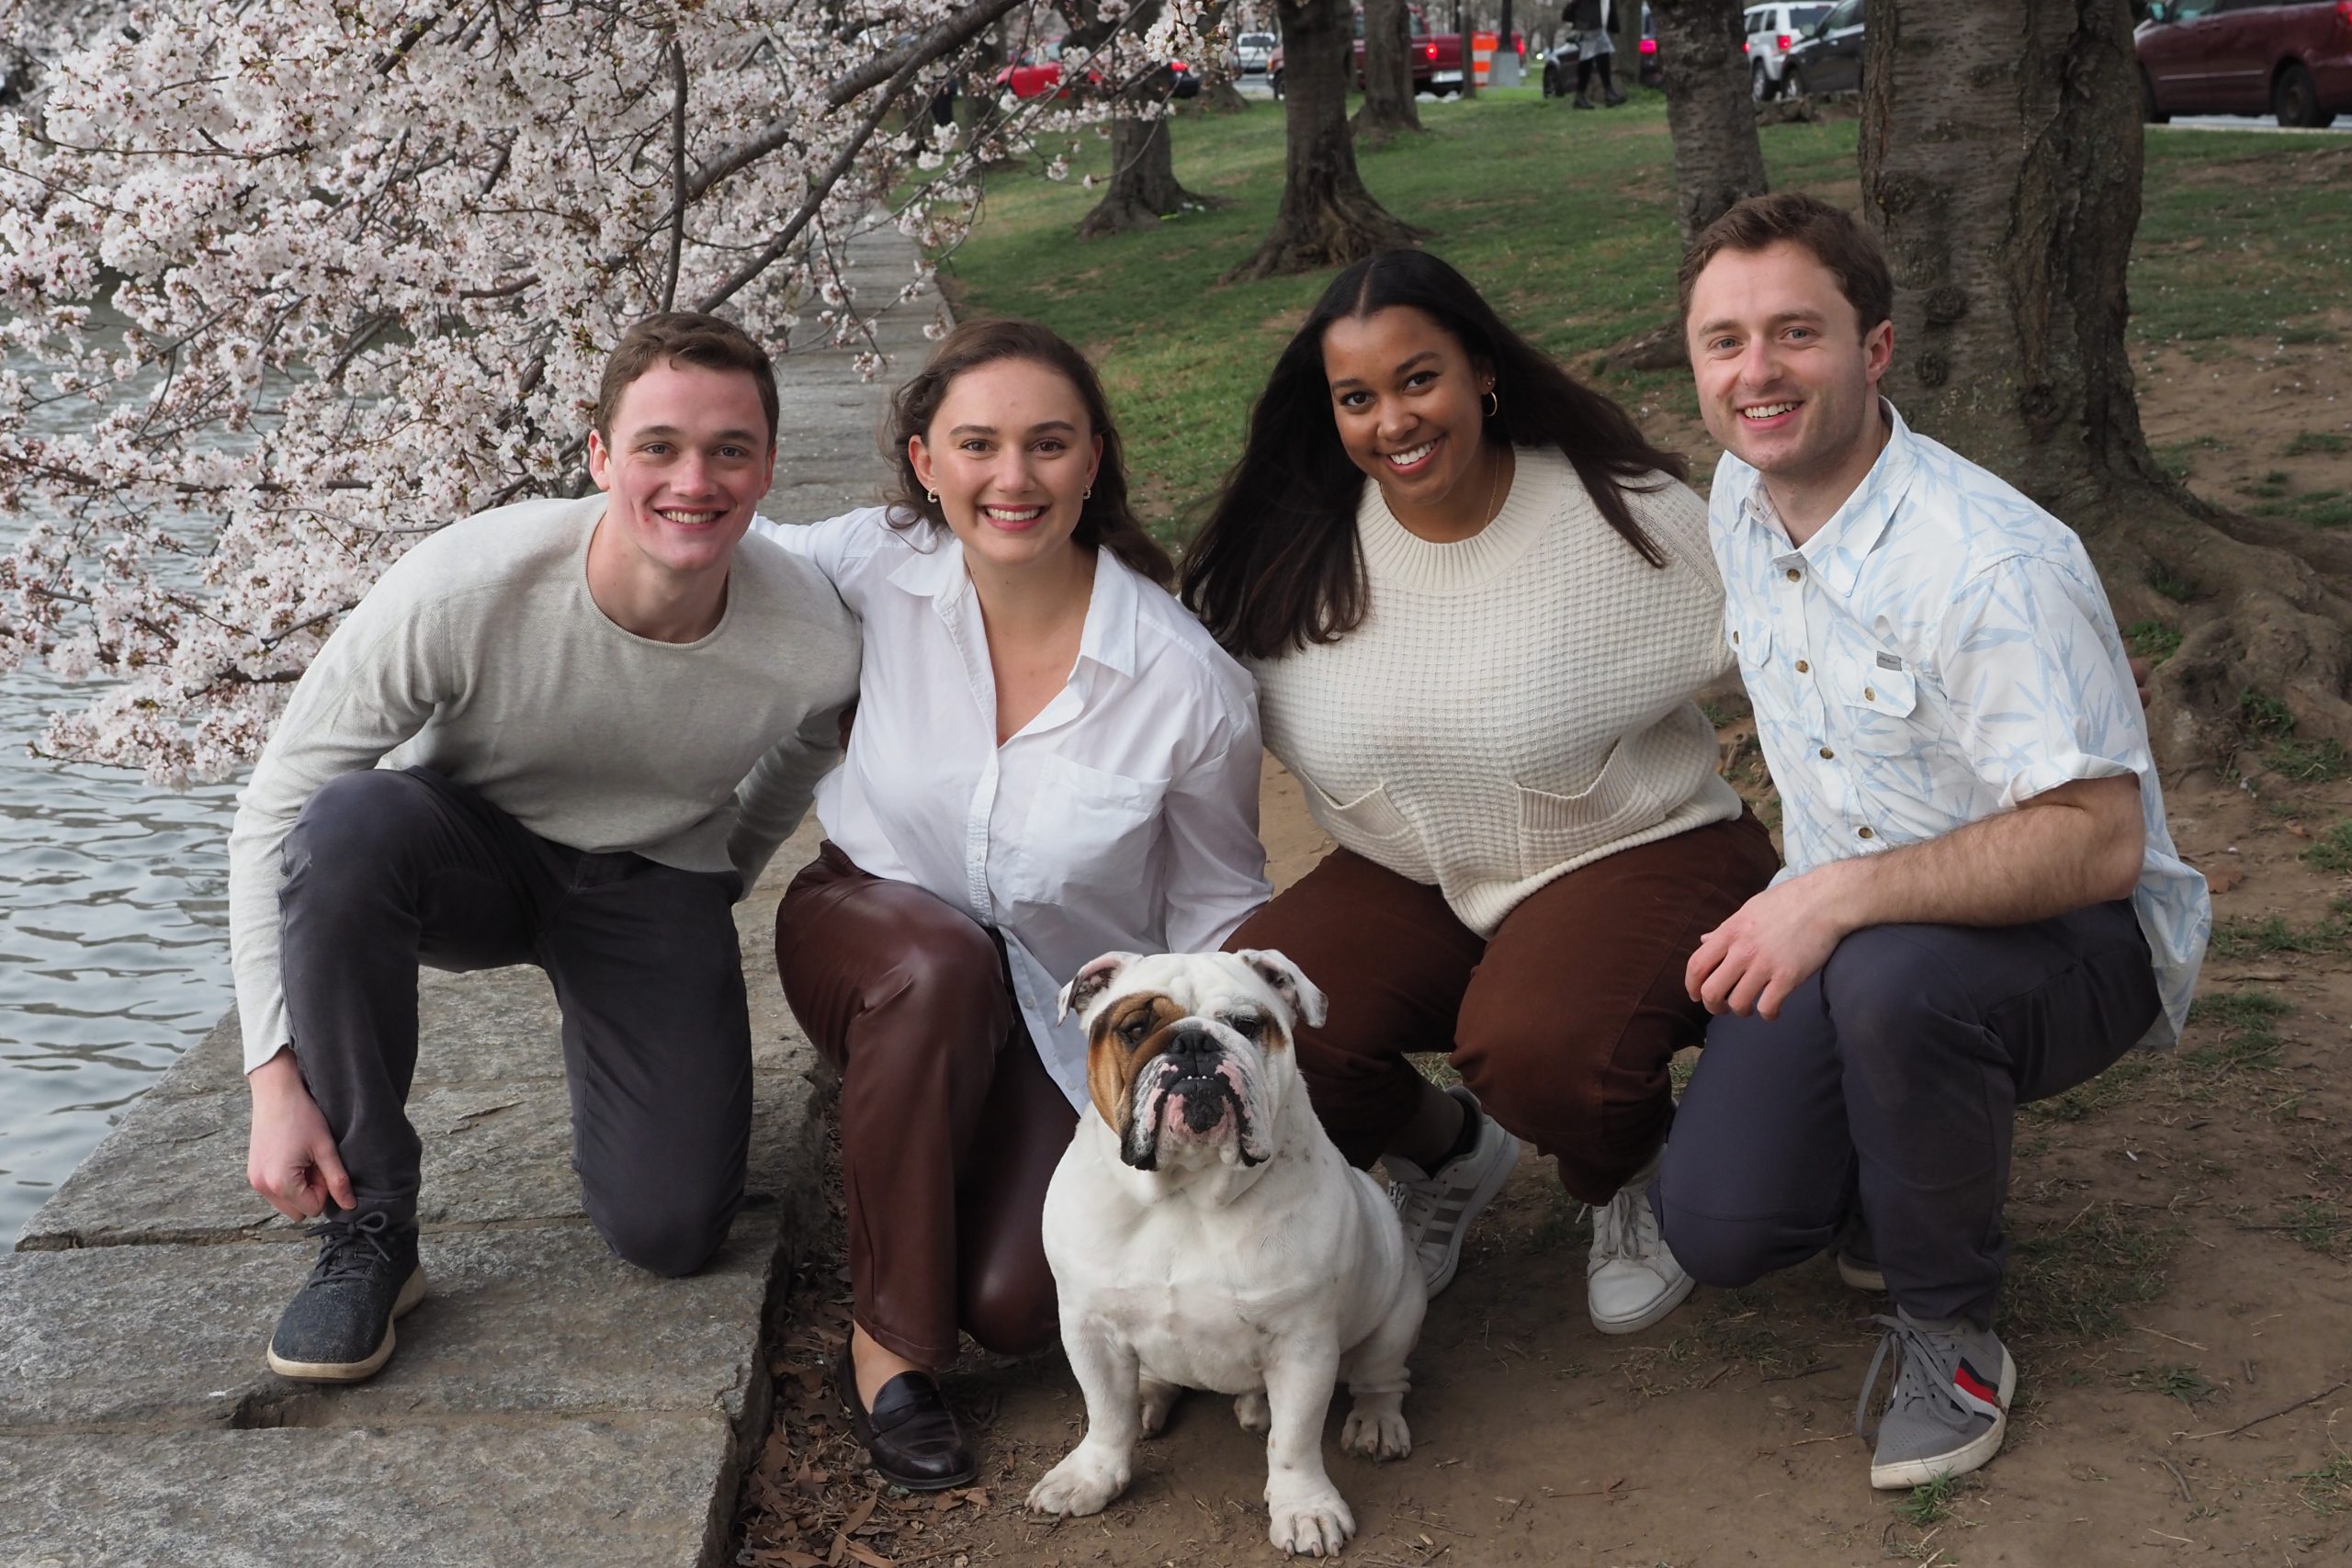 Four students pose in front of cherry blossoms behind Jack the Bulldog